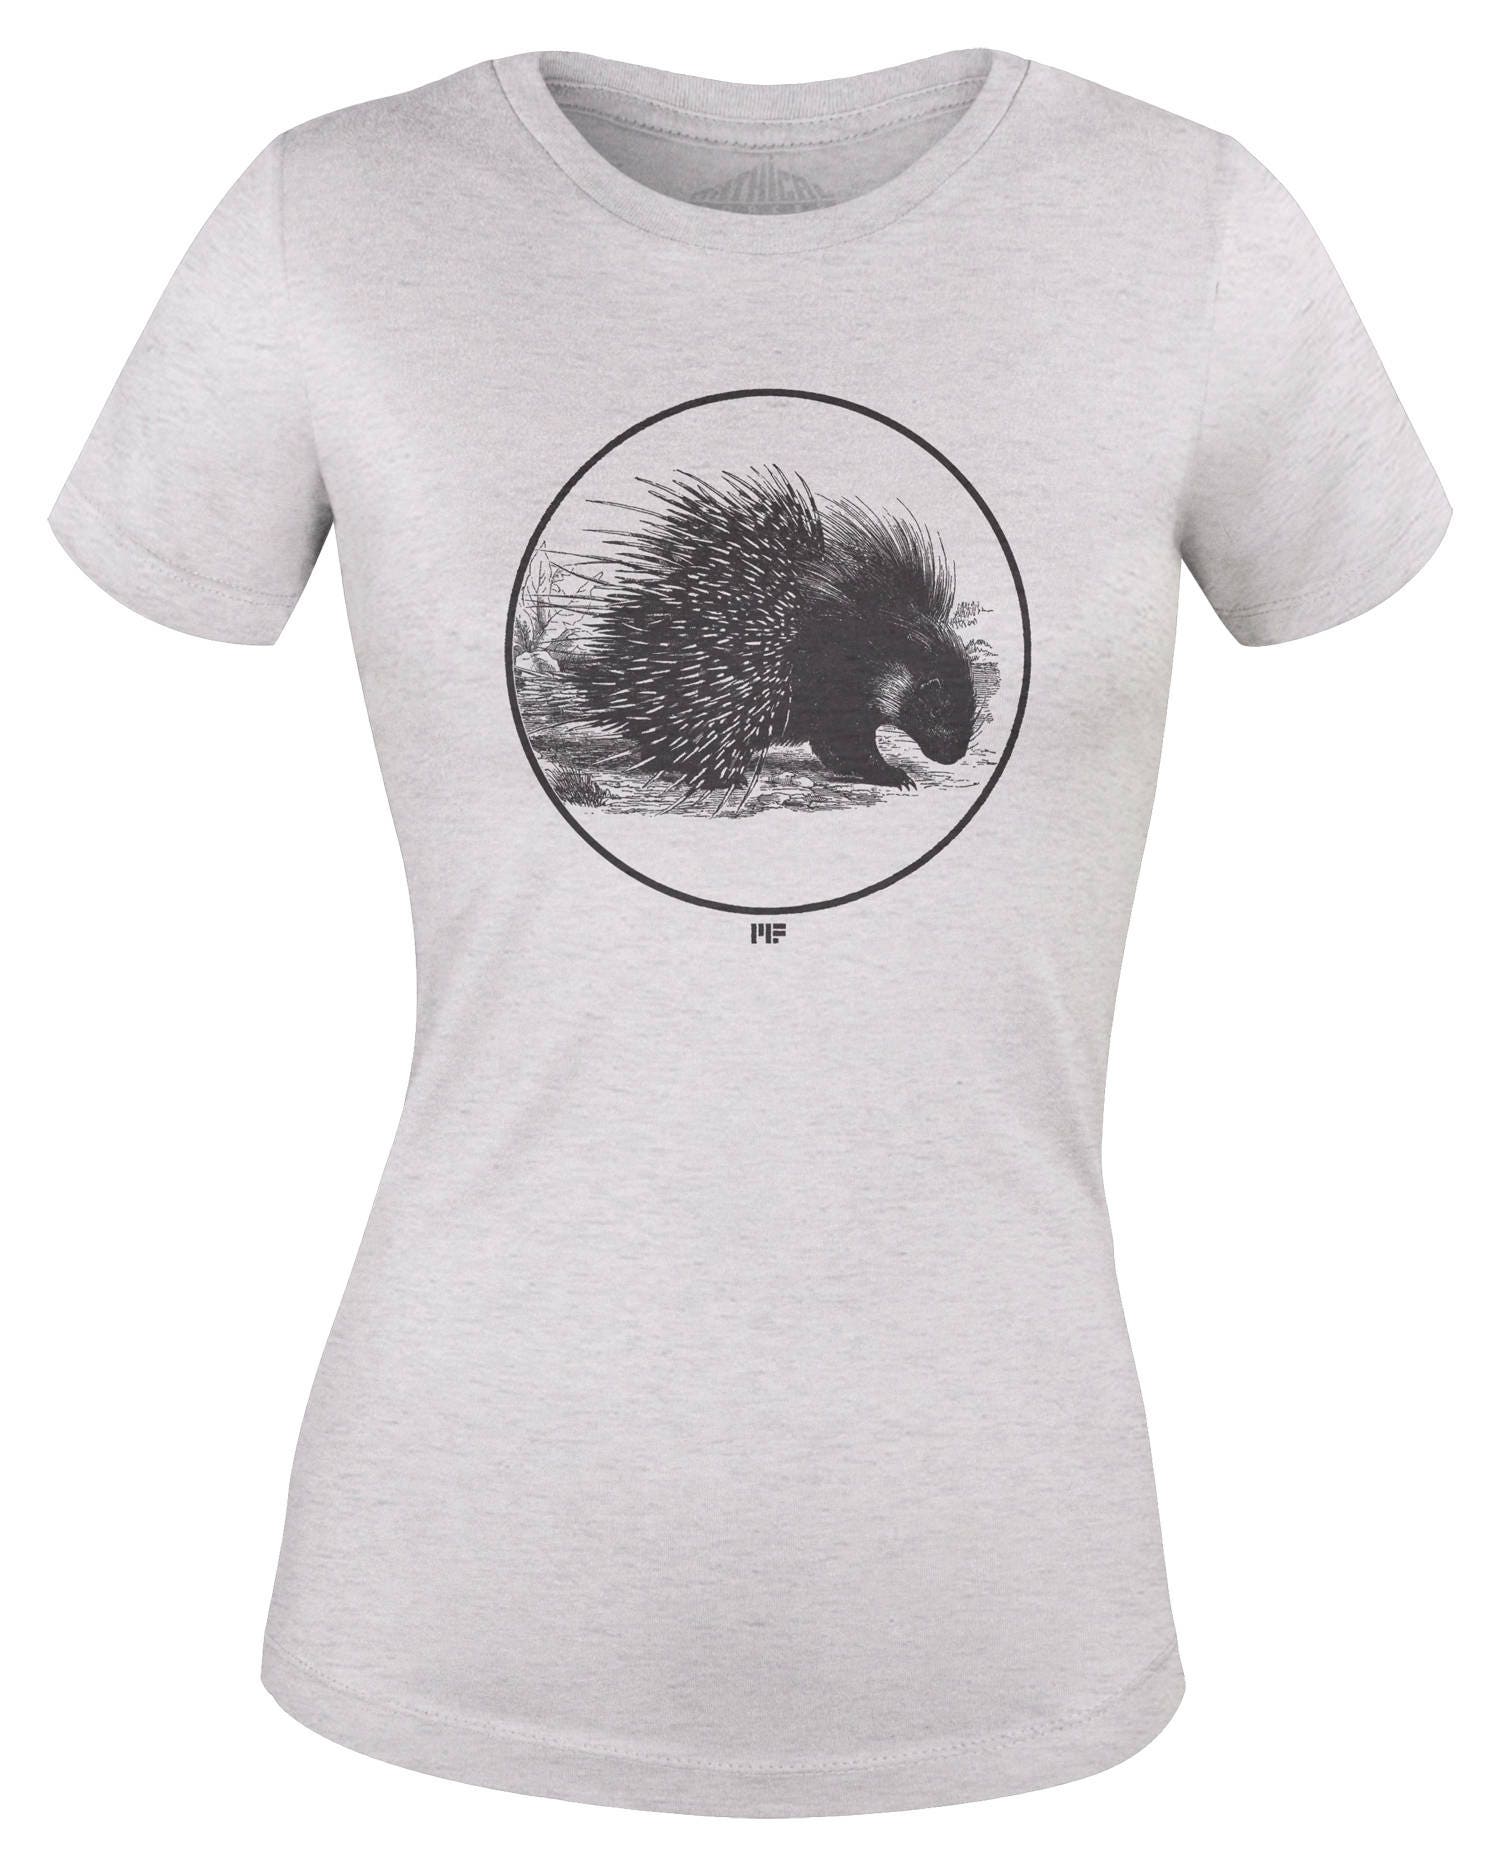 Porcupine Women's T Shirt by Mythical Forces - Etsy UK